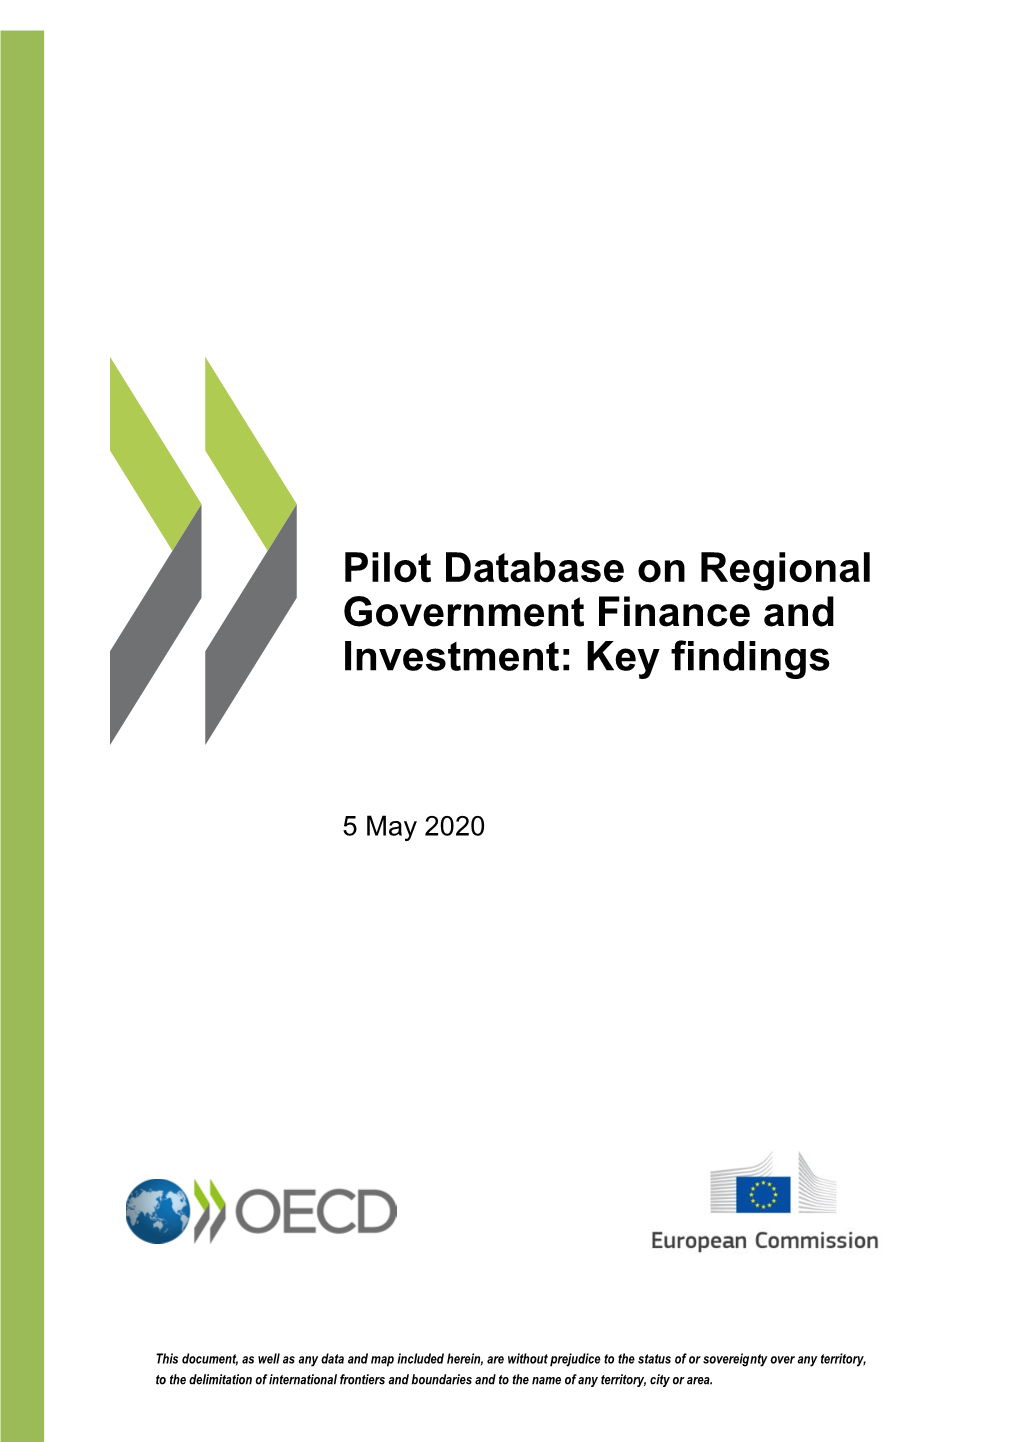 Pilot Database on Regional Government Finance and Investment: Key Findings